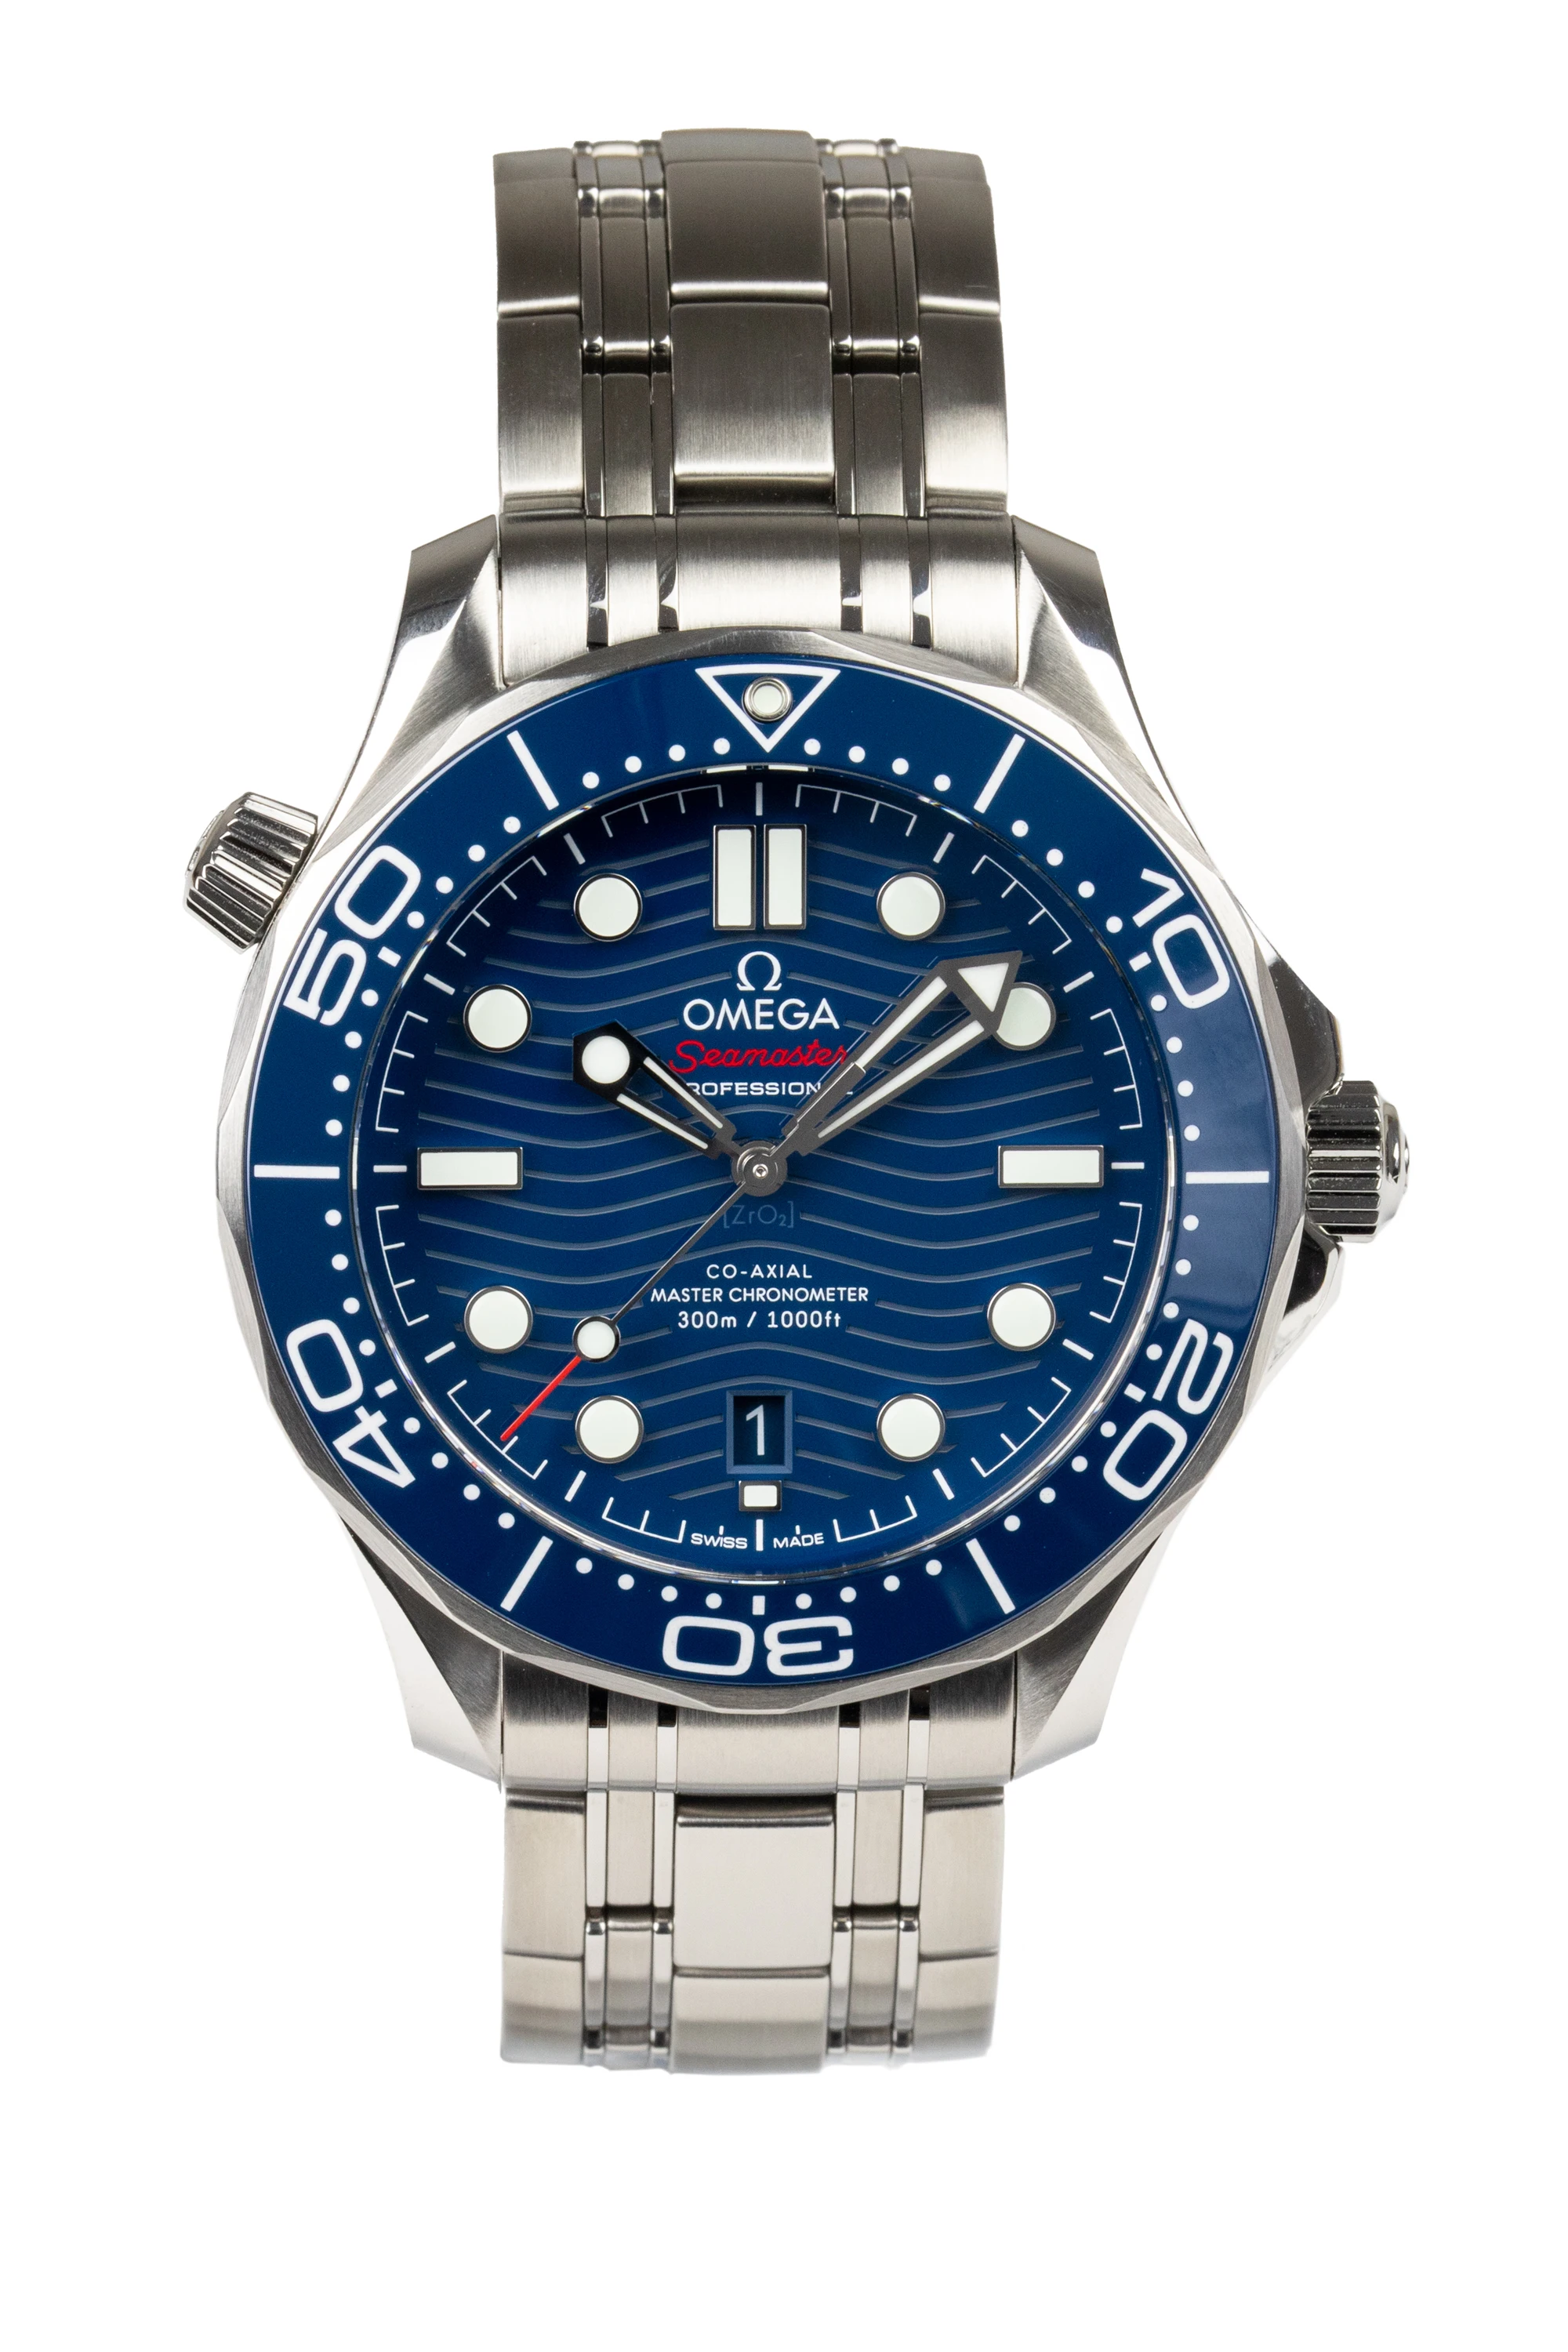 omega seamaster professional co axial chronometer 300m 1000ft